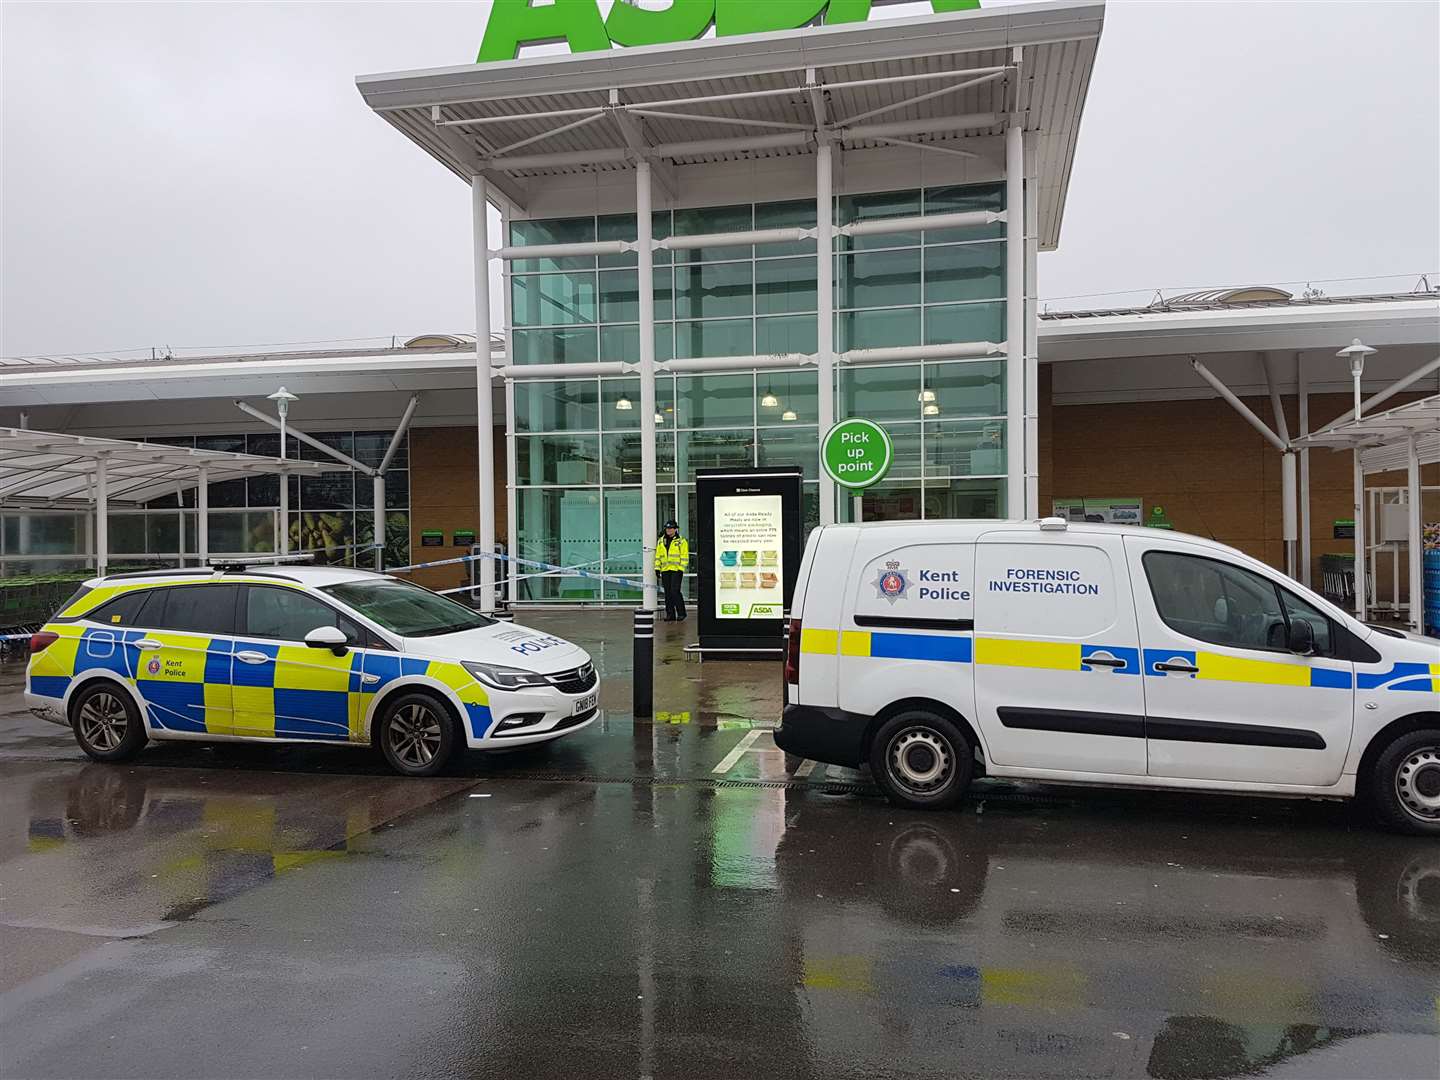 Police vehicles parked outside Asda in Ashford this morning